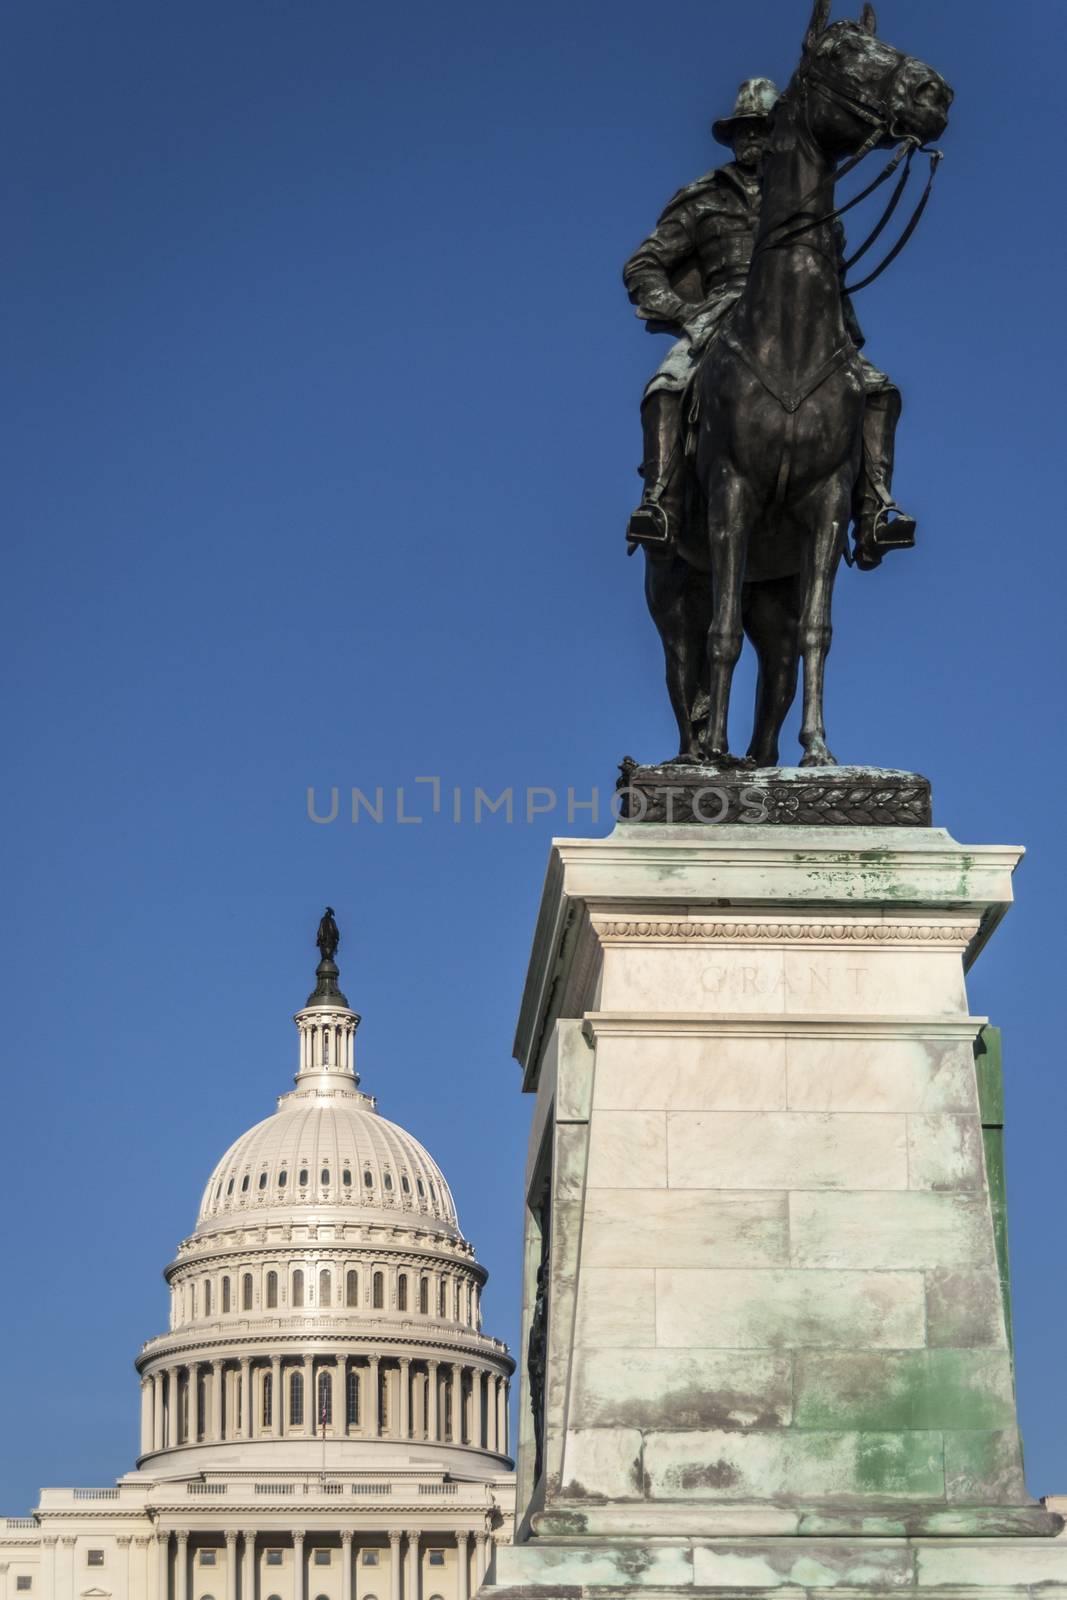 General Ulysses Grant statue in front of US capitol, Washington DC.